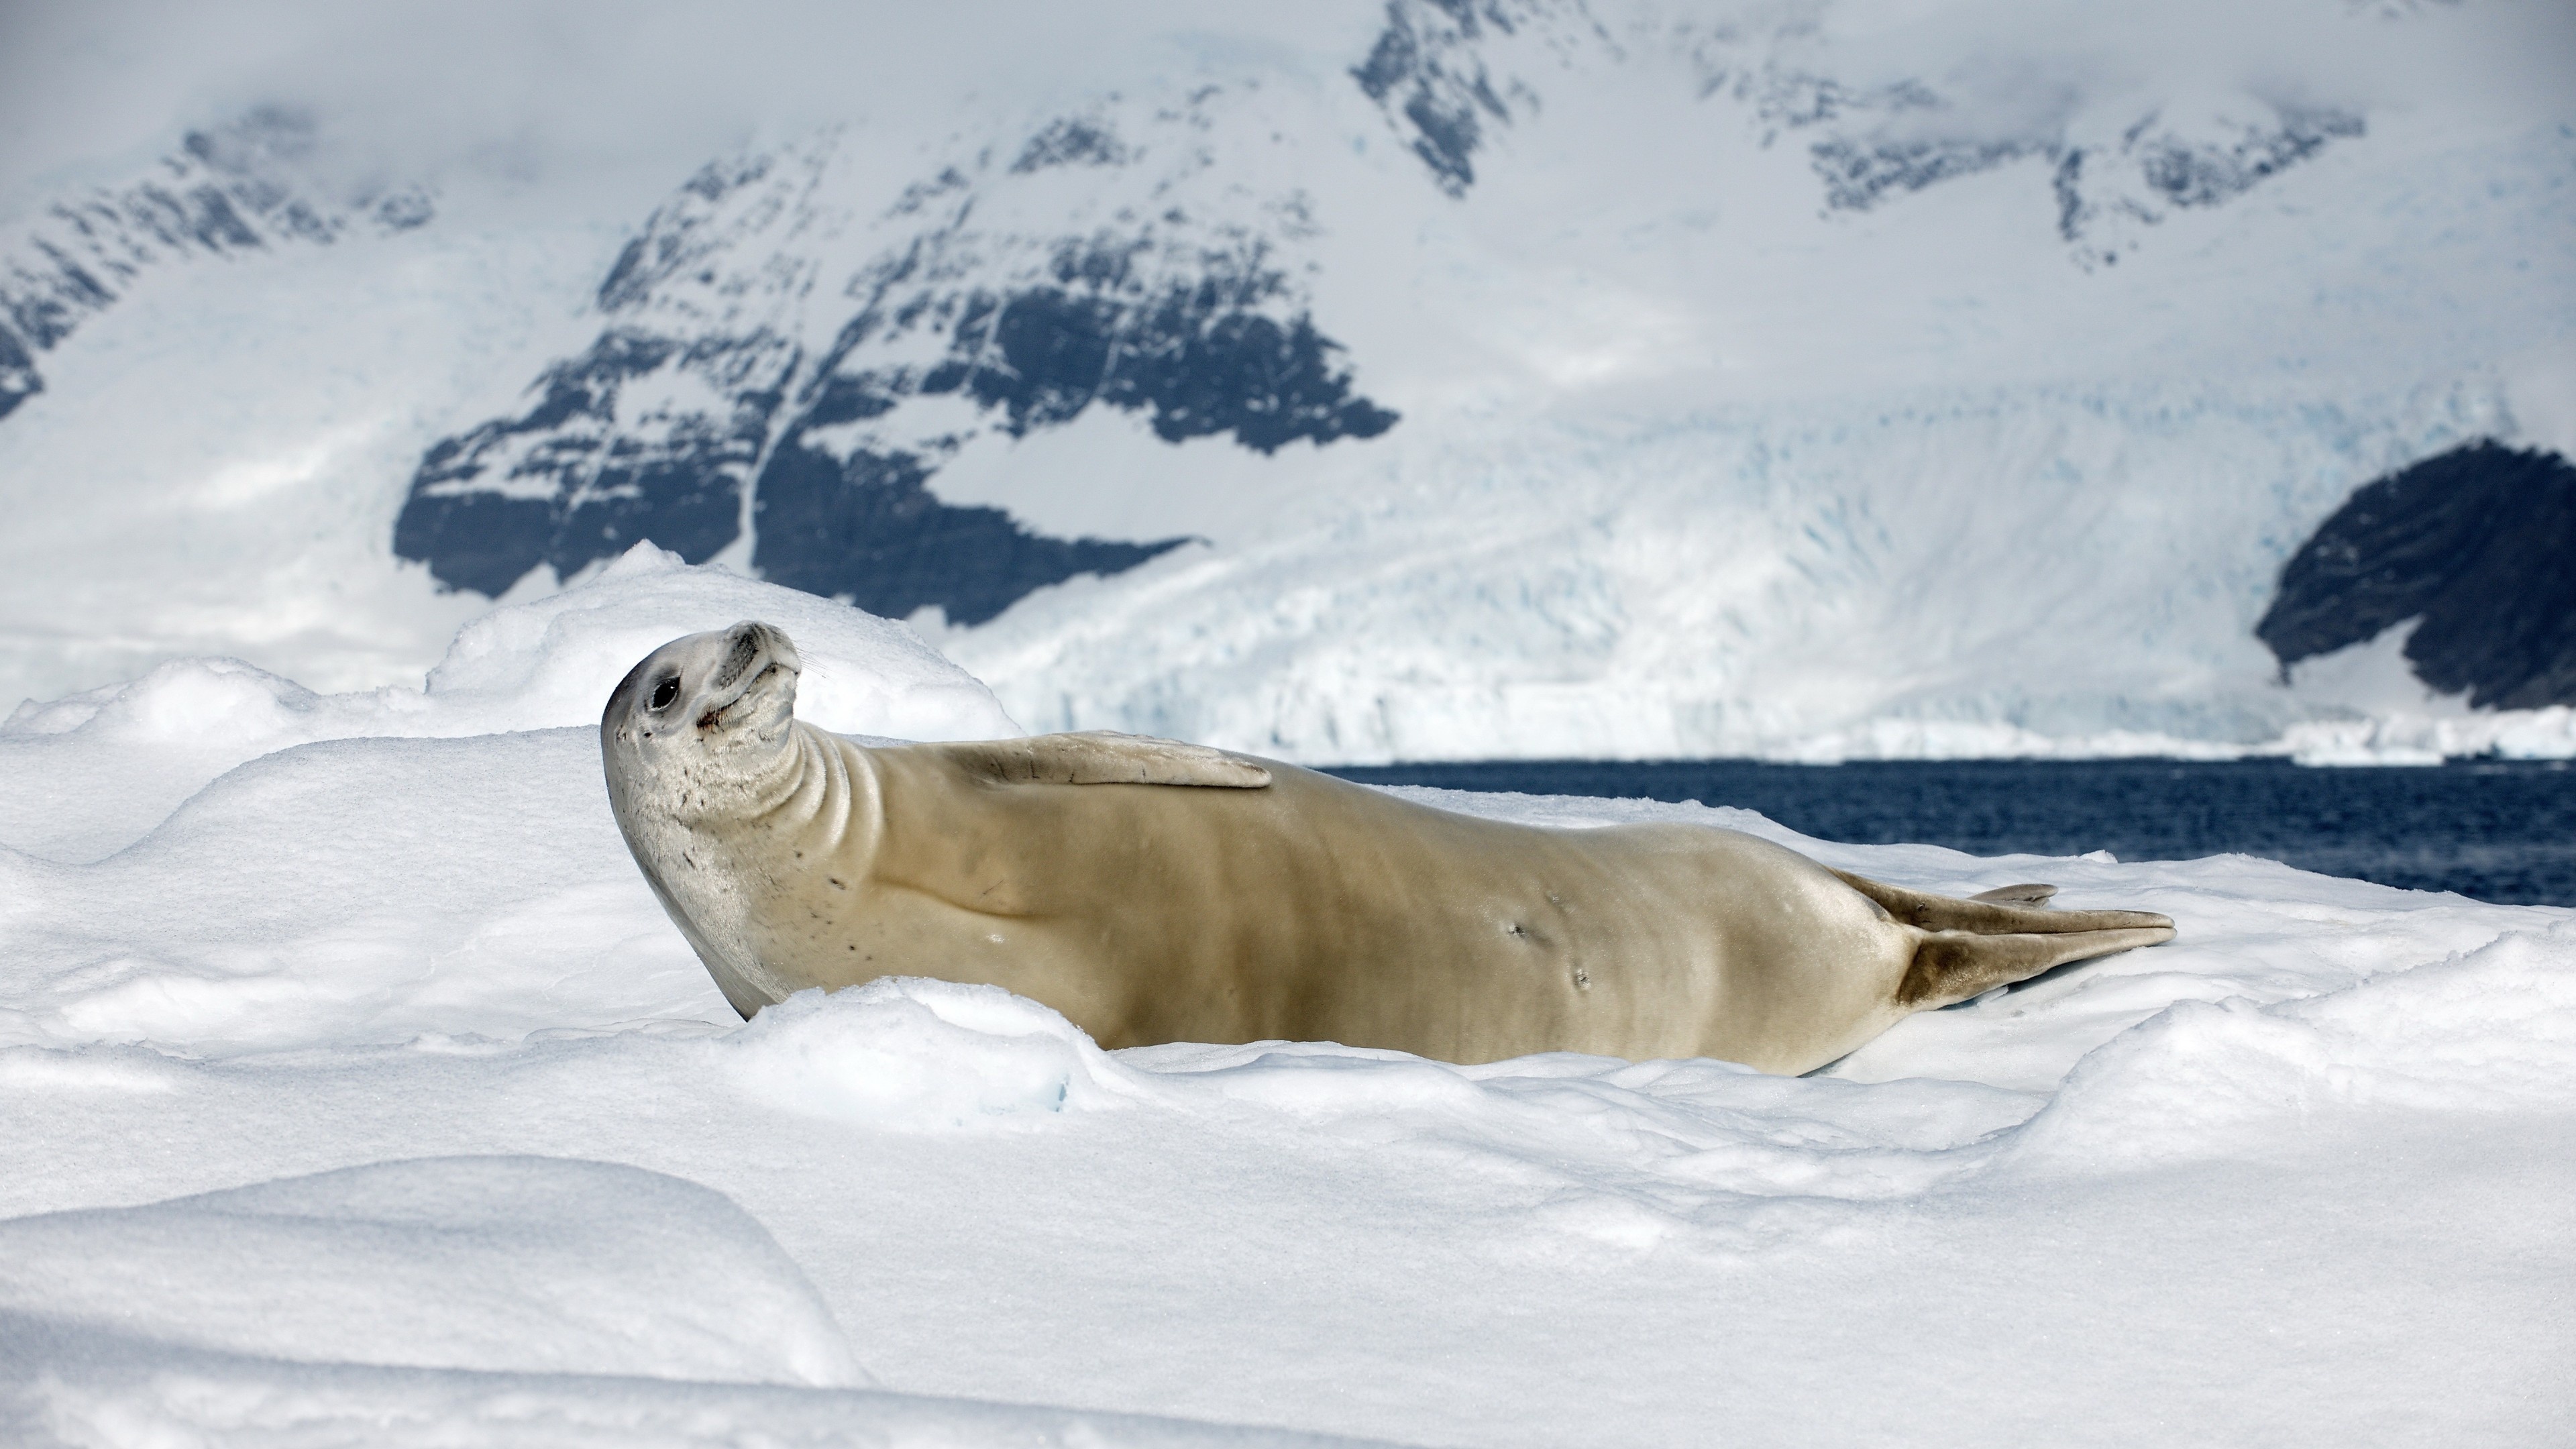 Smiling seal wallpaper, Crabeater seal in snow, Sunny day beauty, Adorable animal, 3840x2160 4K Desktop